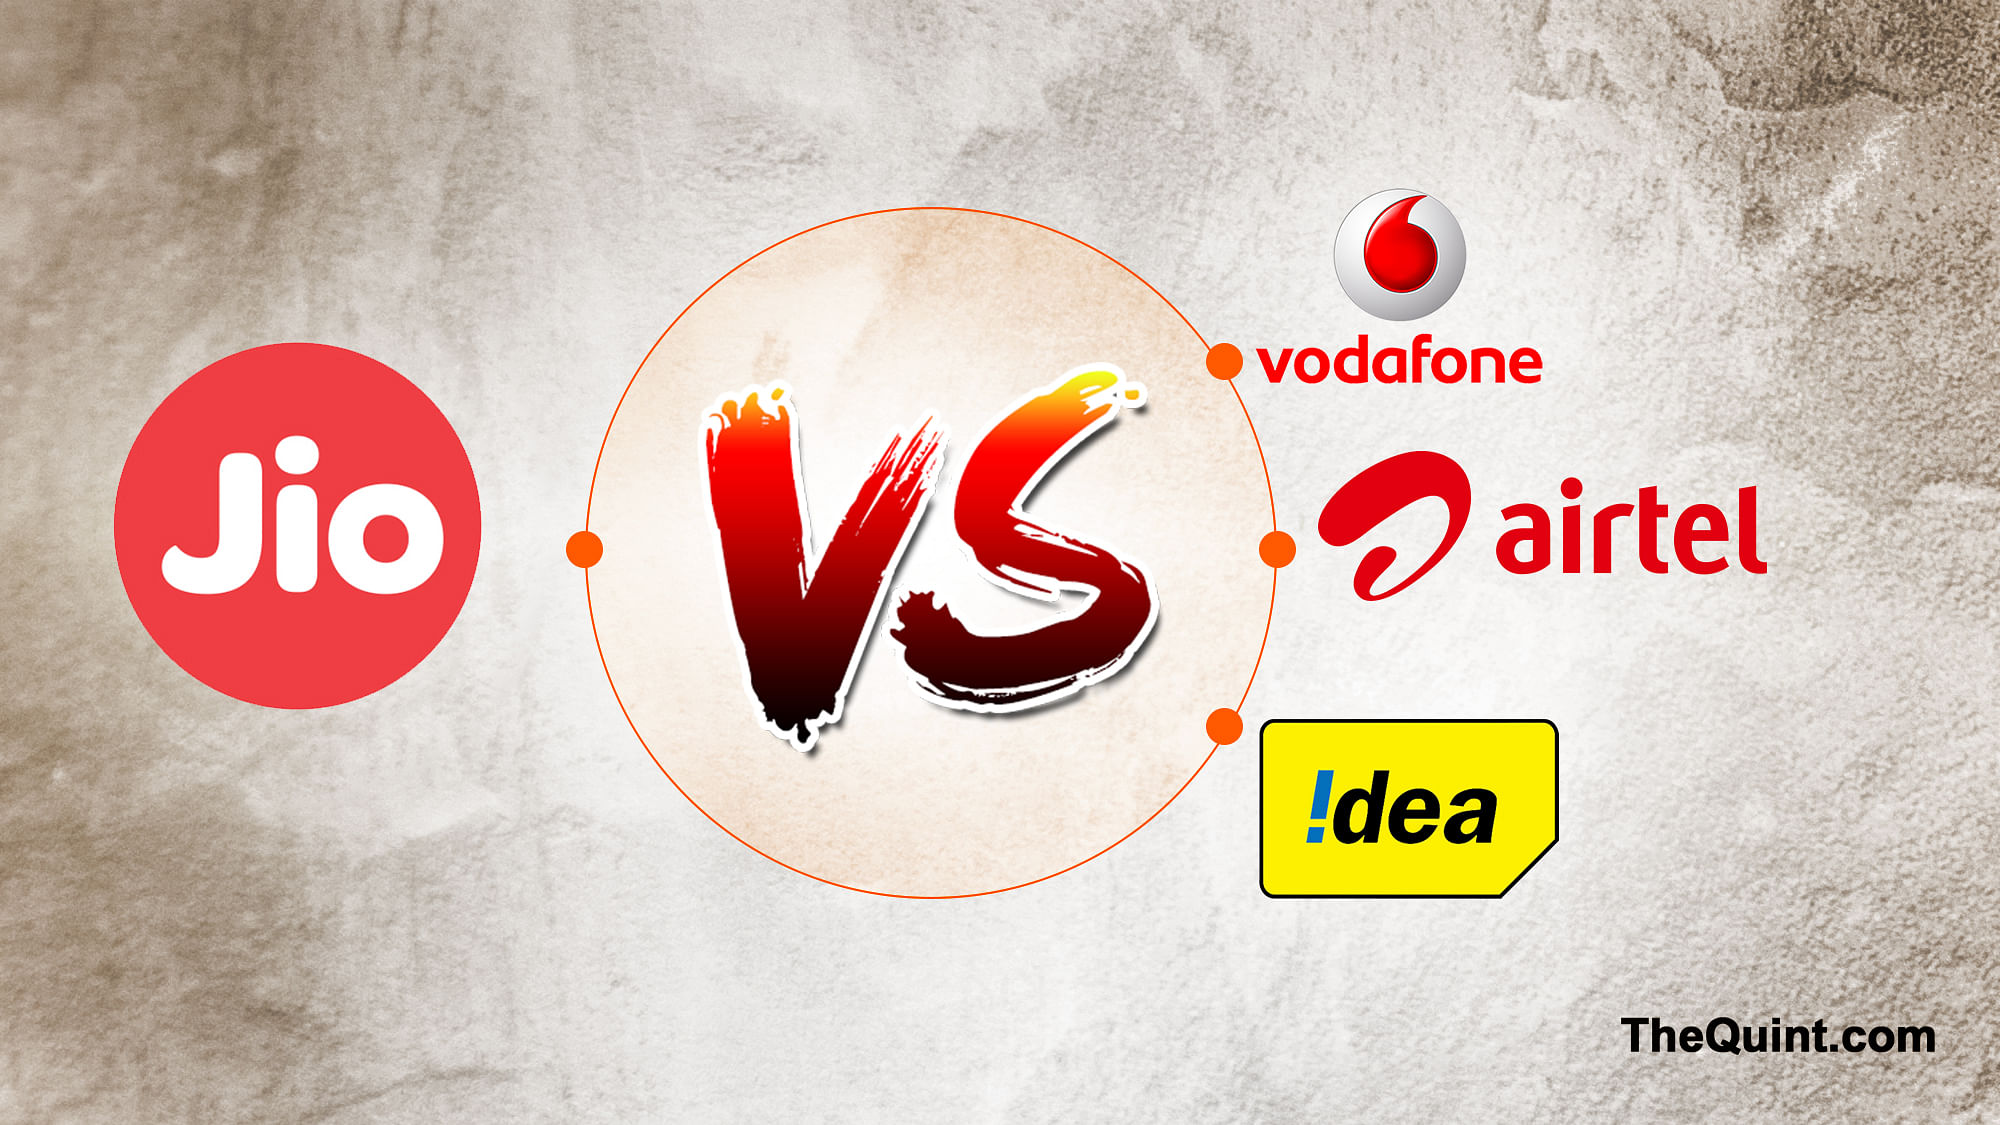 Airtel and Vodafone Idea have been taking potshots on Reliance Jio over its latest announcement of charging its subscribers 6 paise per minute for voice calls.